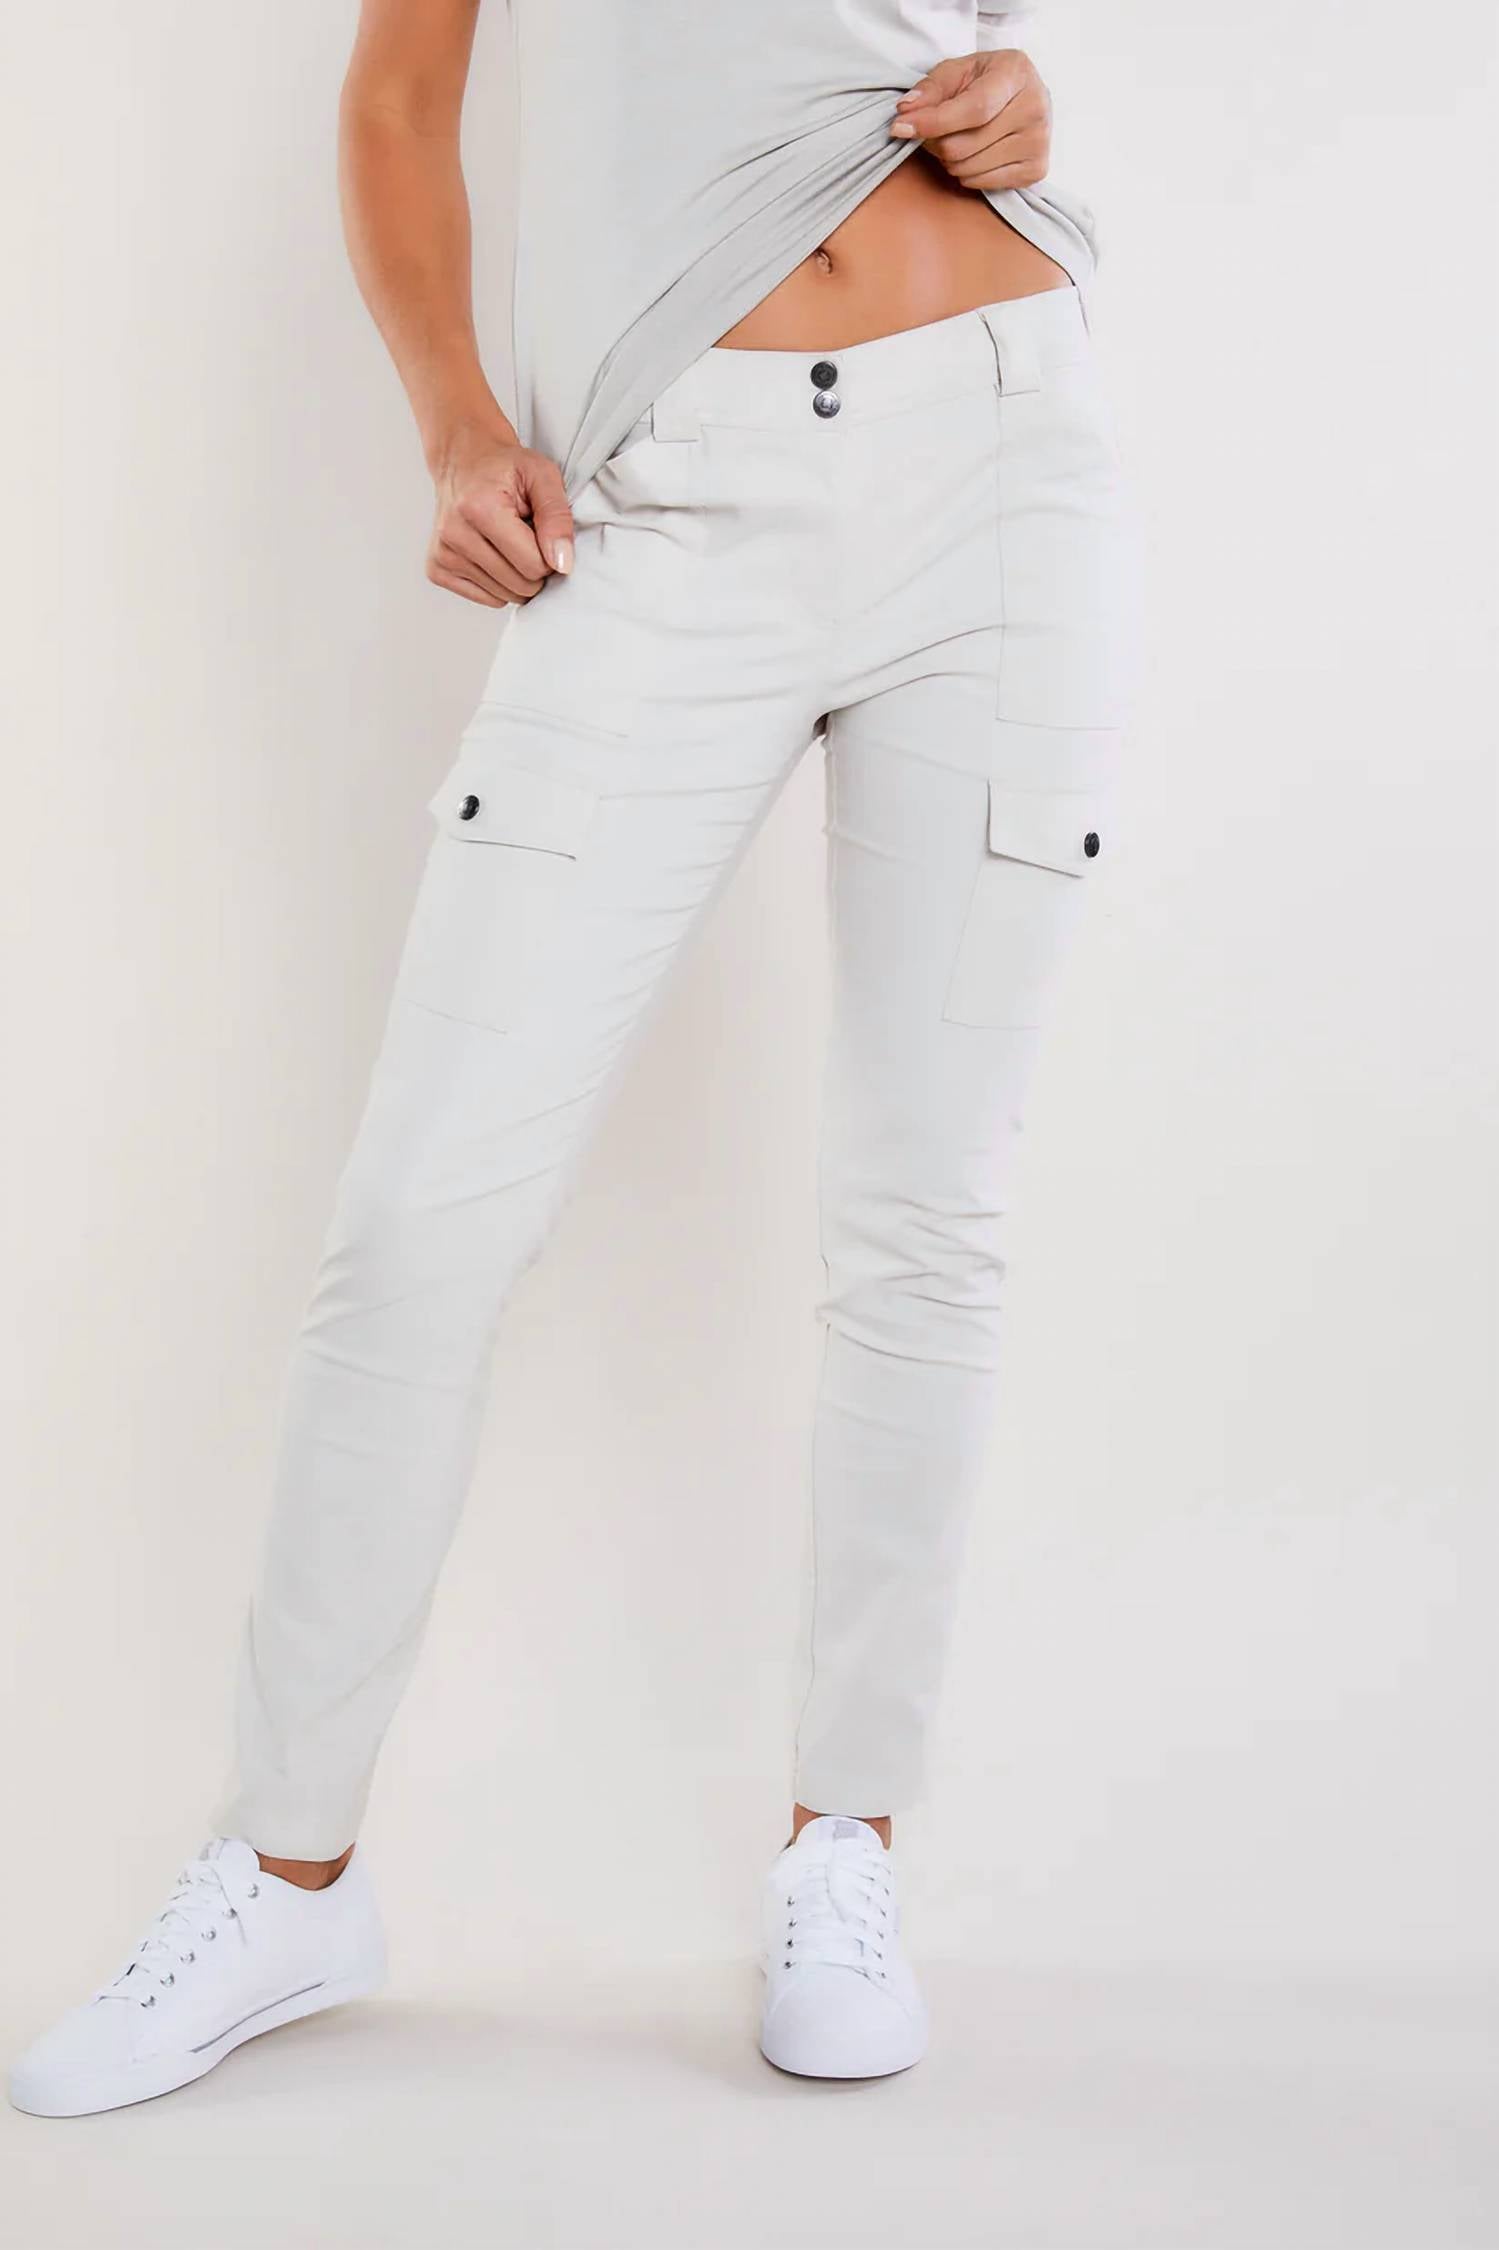 ANATOMIE Kate Saira Cargo Pant With Pockets in Stone